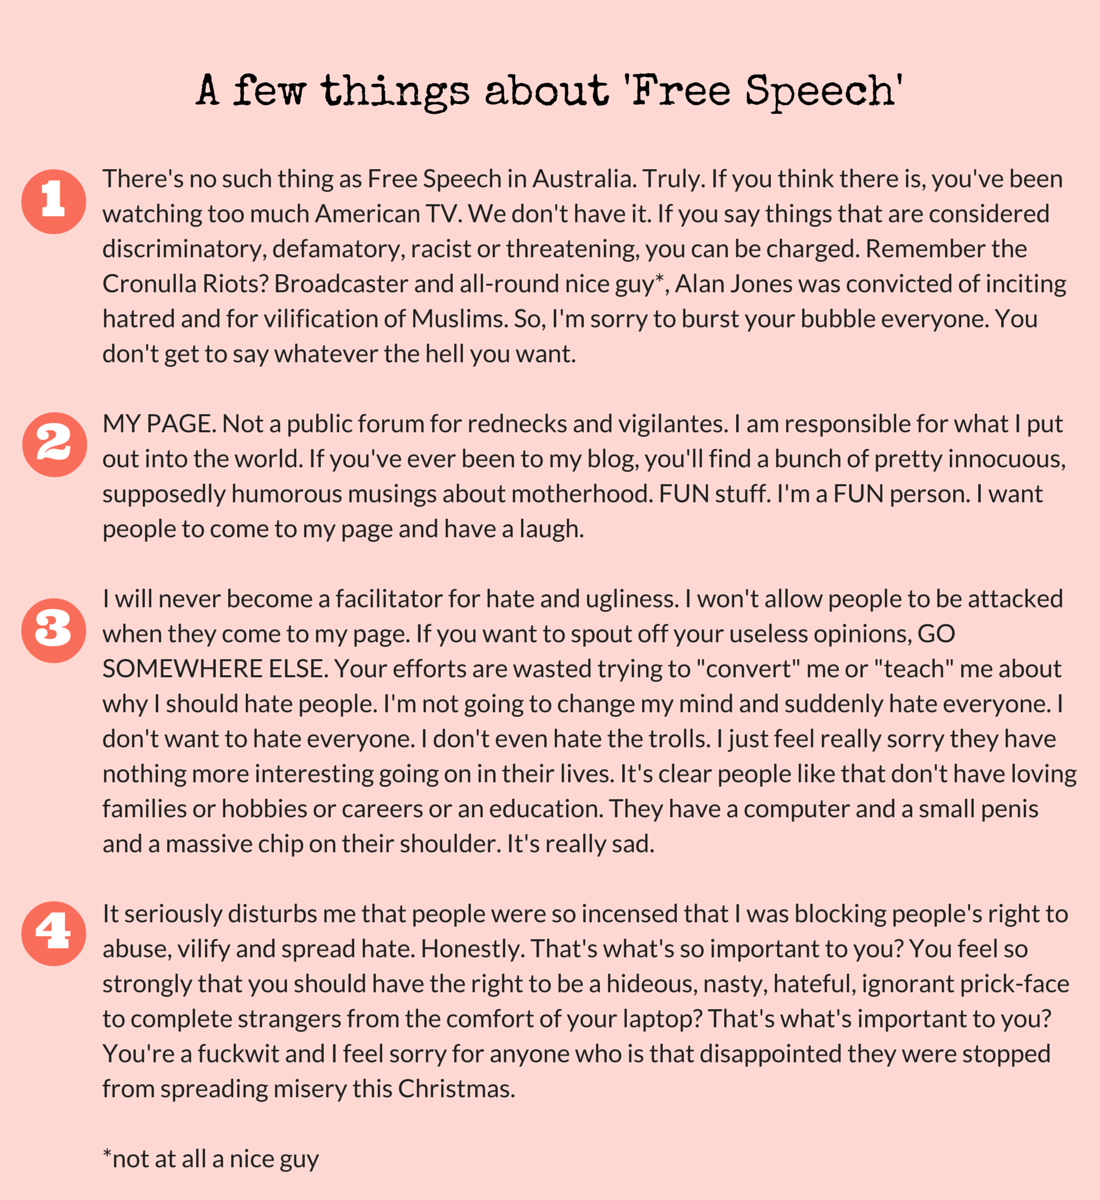 Some points about free speech